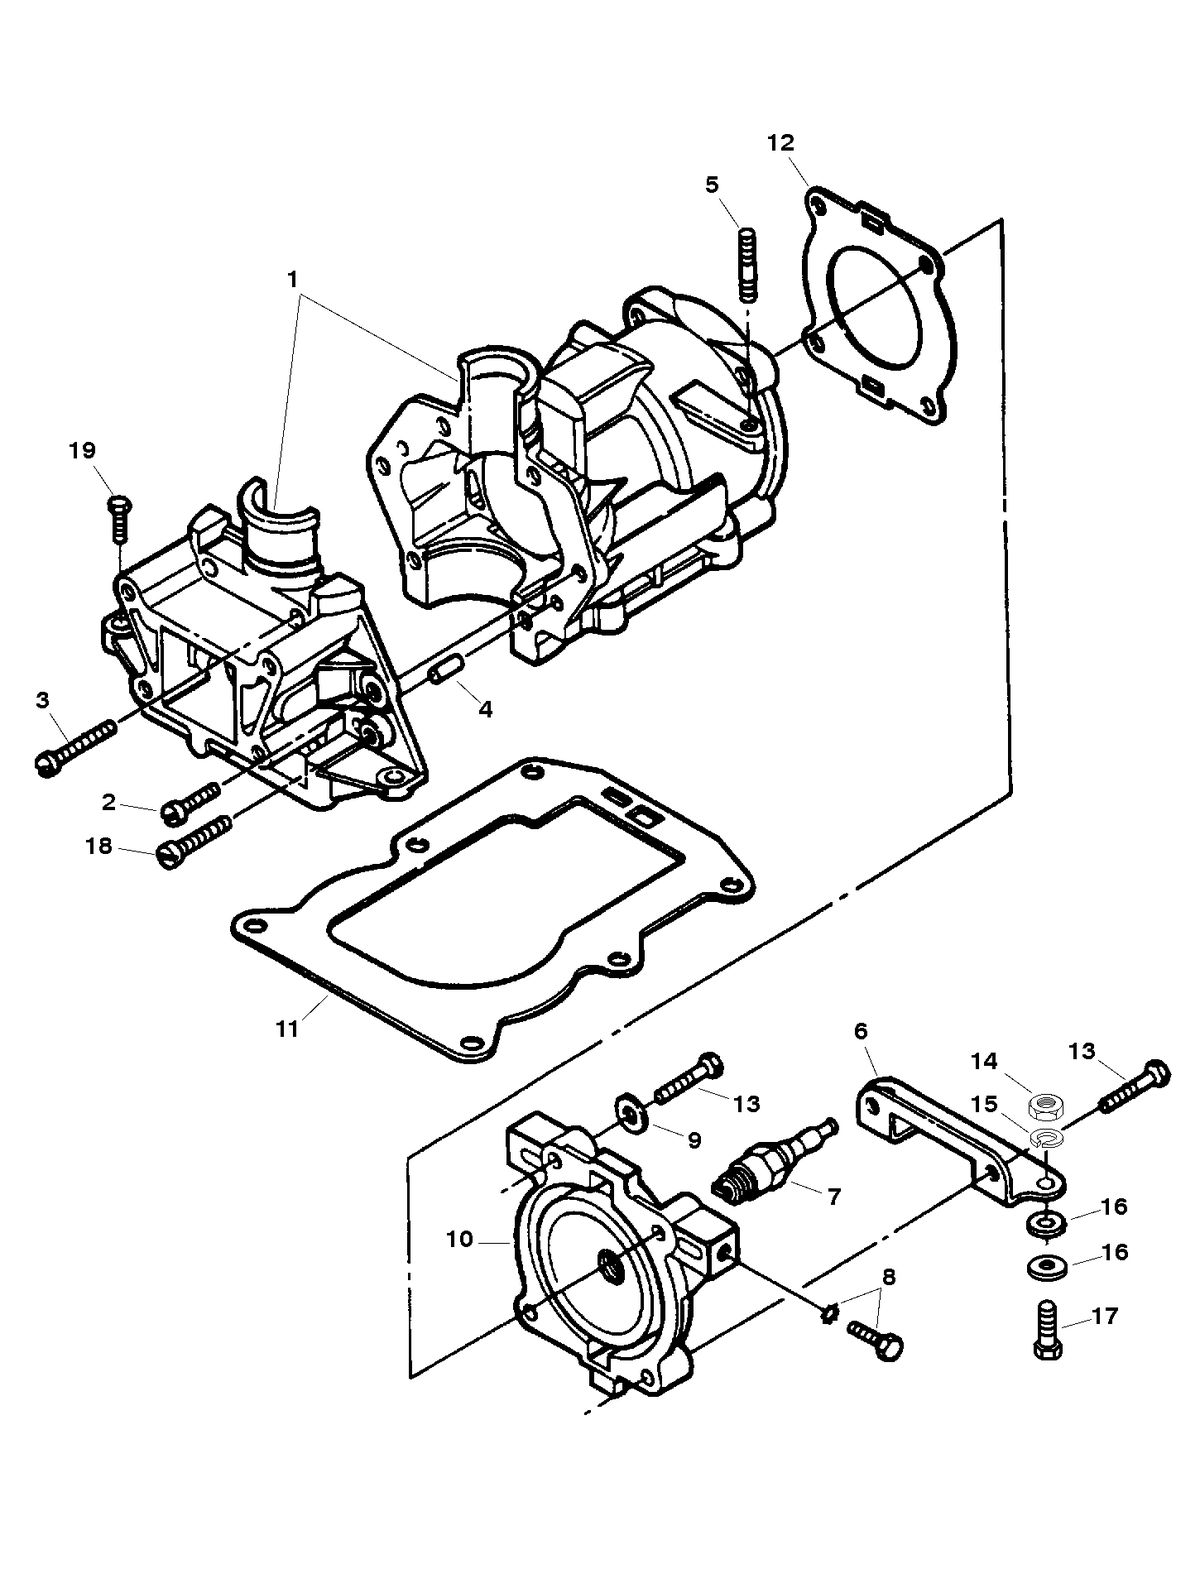 FORCE 5 H.P. CYLINDER BLOCK ASSEMBLY